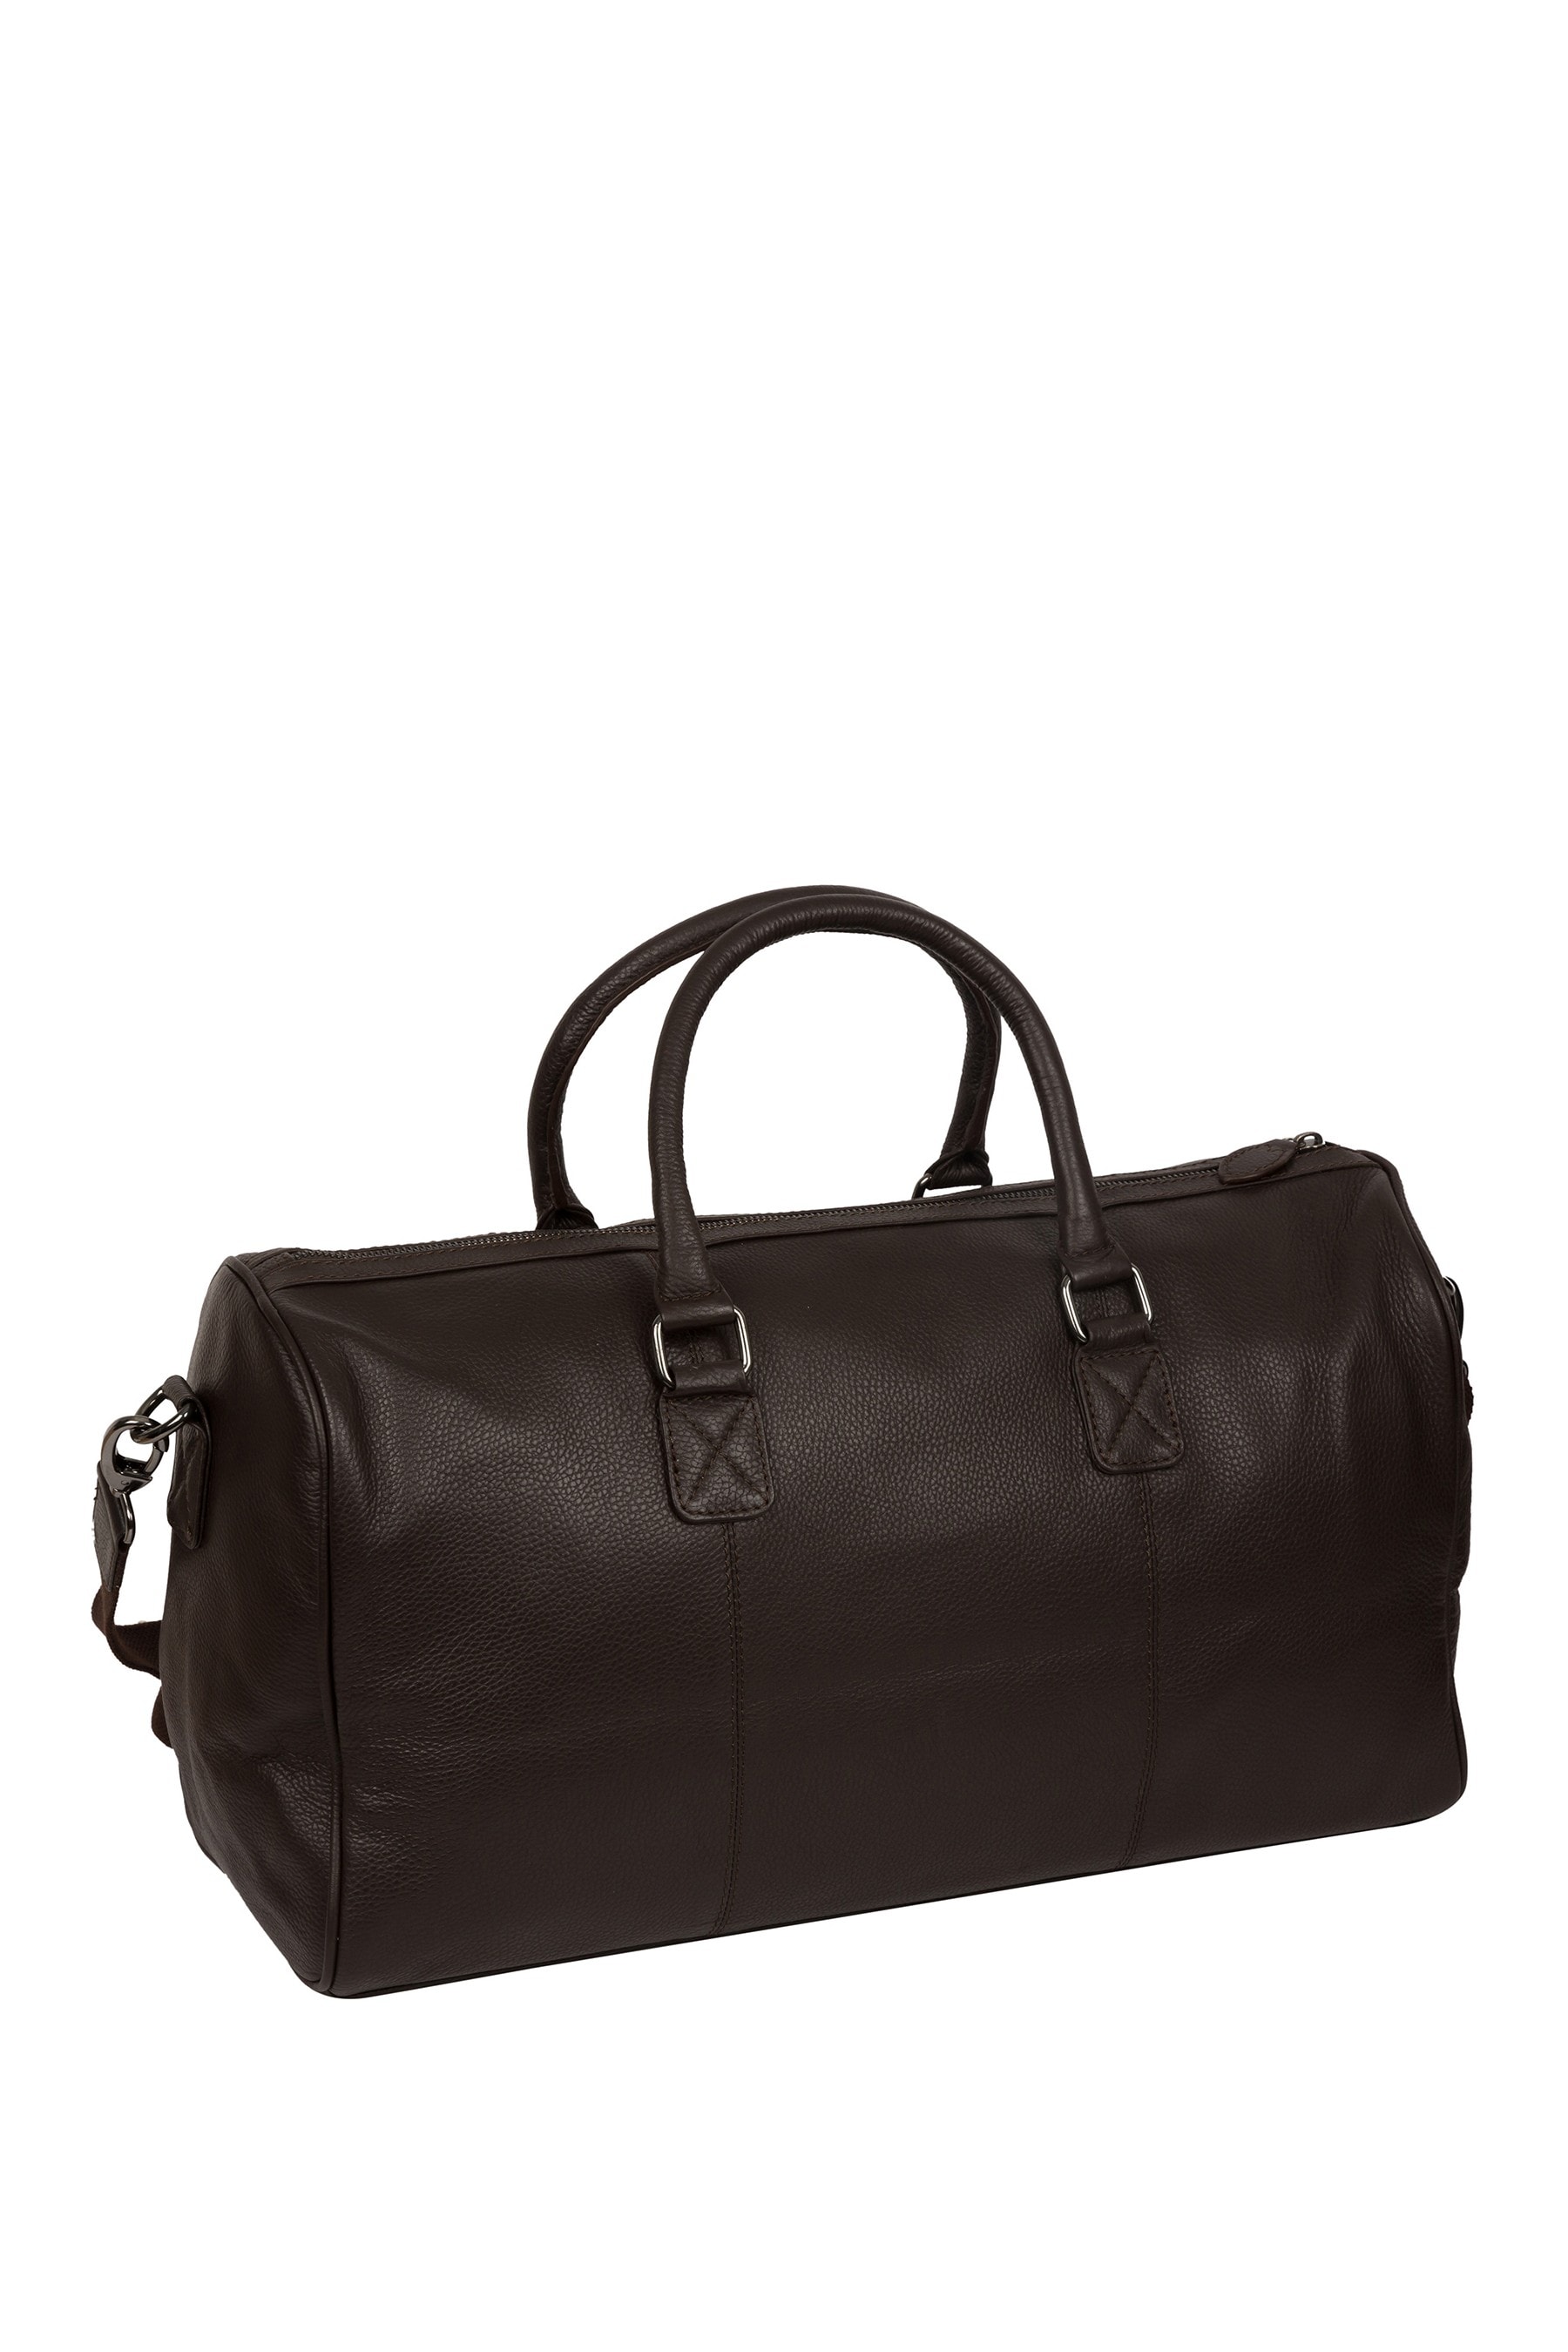 Buy Cultured London Brown Club Leather Holdall from the Next UK online shop